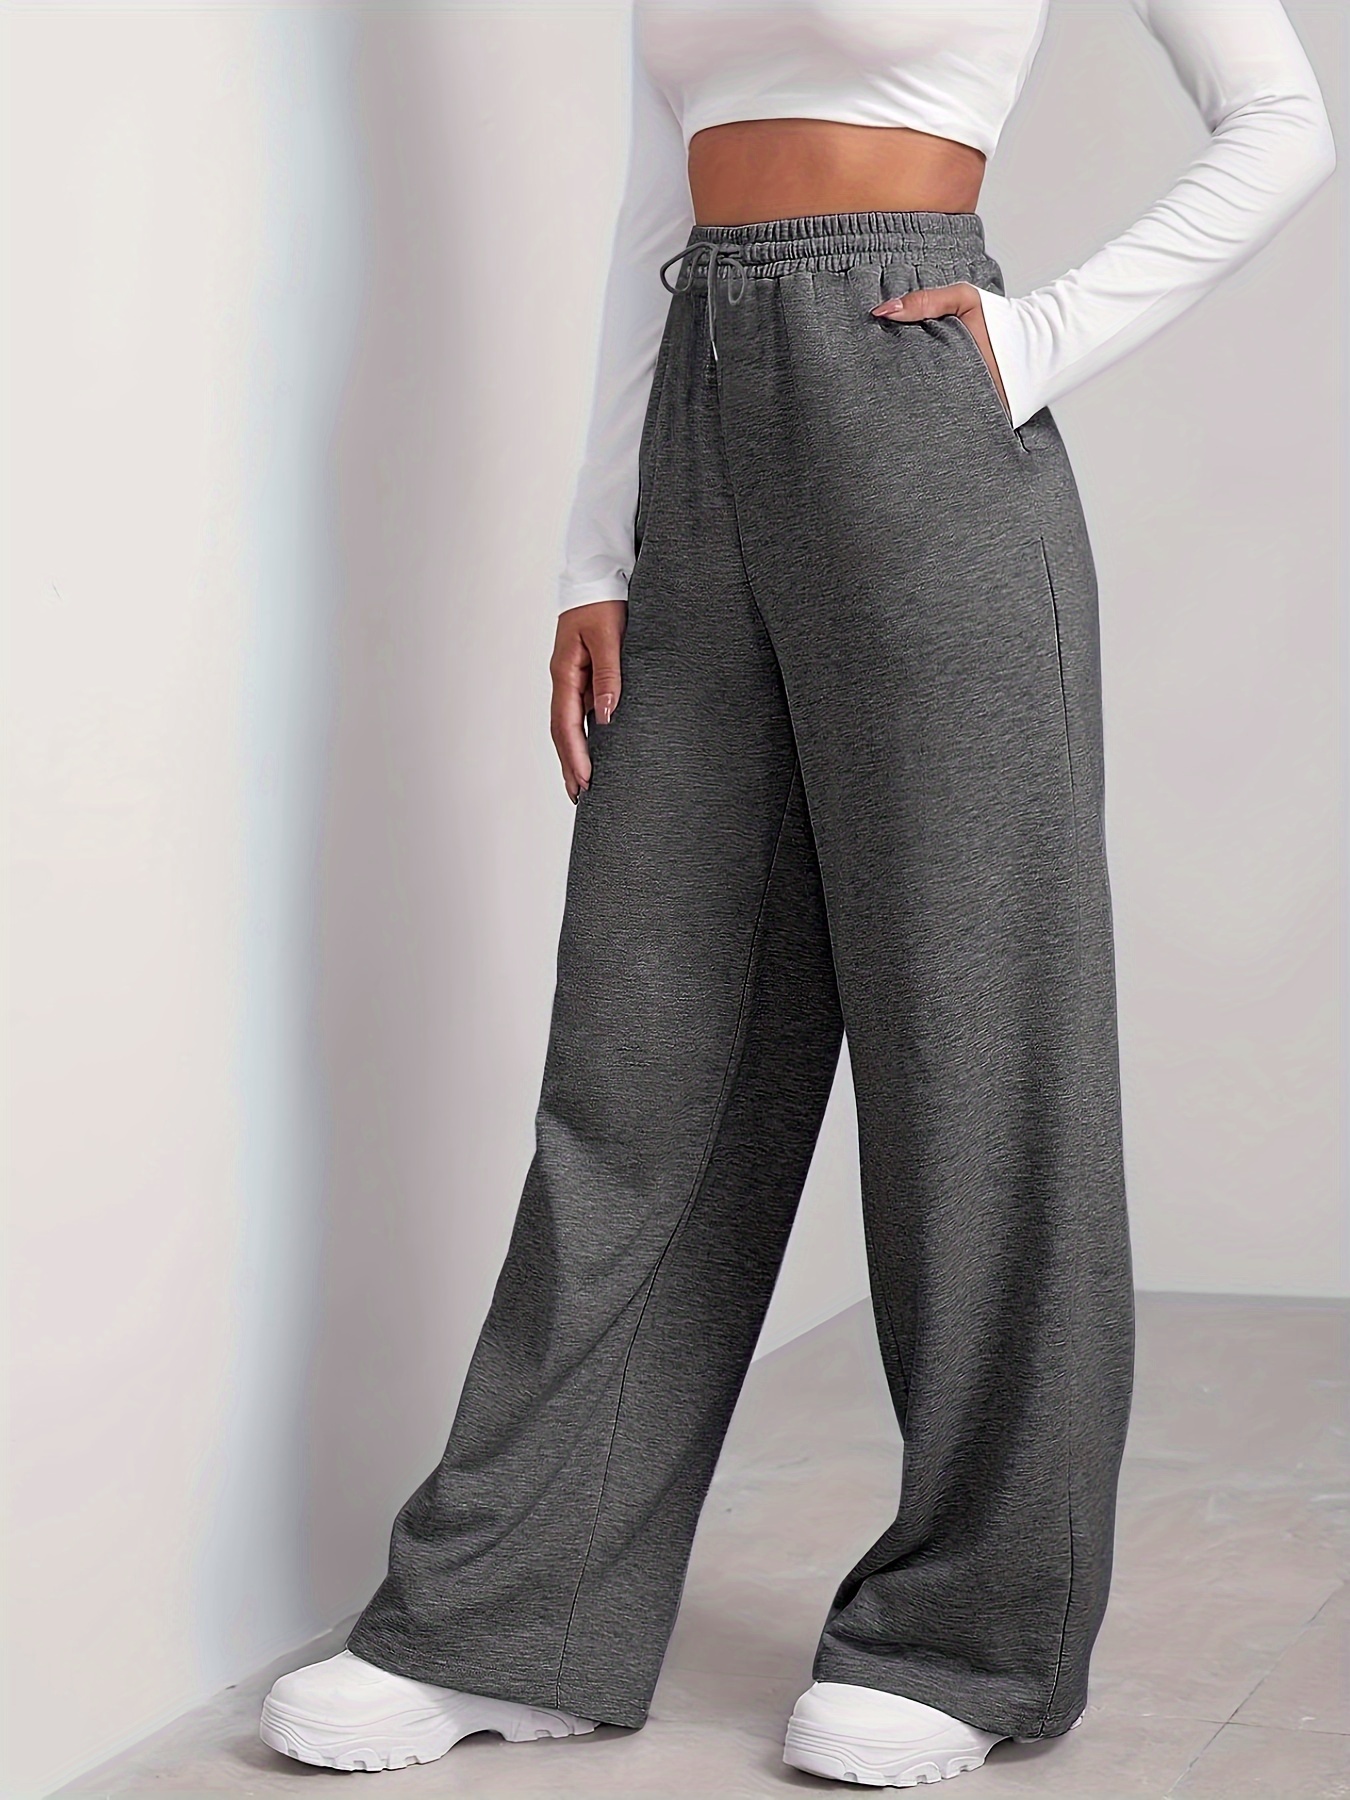  HeSaYep Women's Flare Wide Leg Sweatpants Drawstring High  Waisted Baggy Pants Athletic Pants Trousers, Dark Grey XS : Clothing, Shoes  & Jewelry